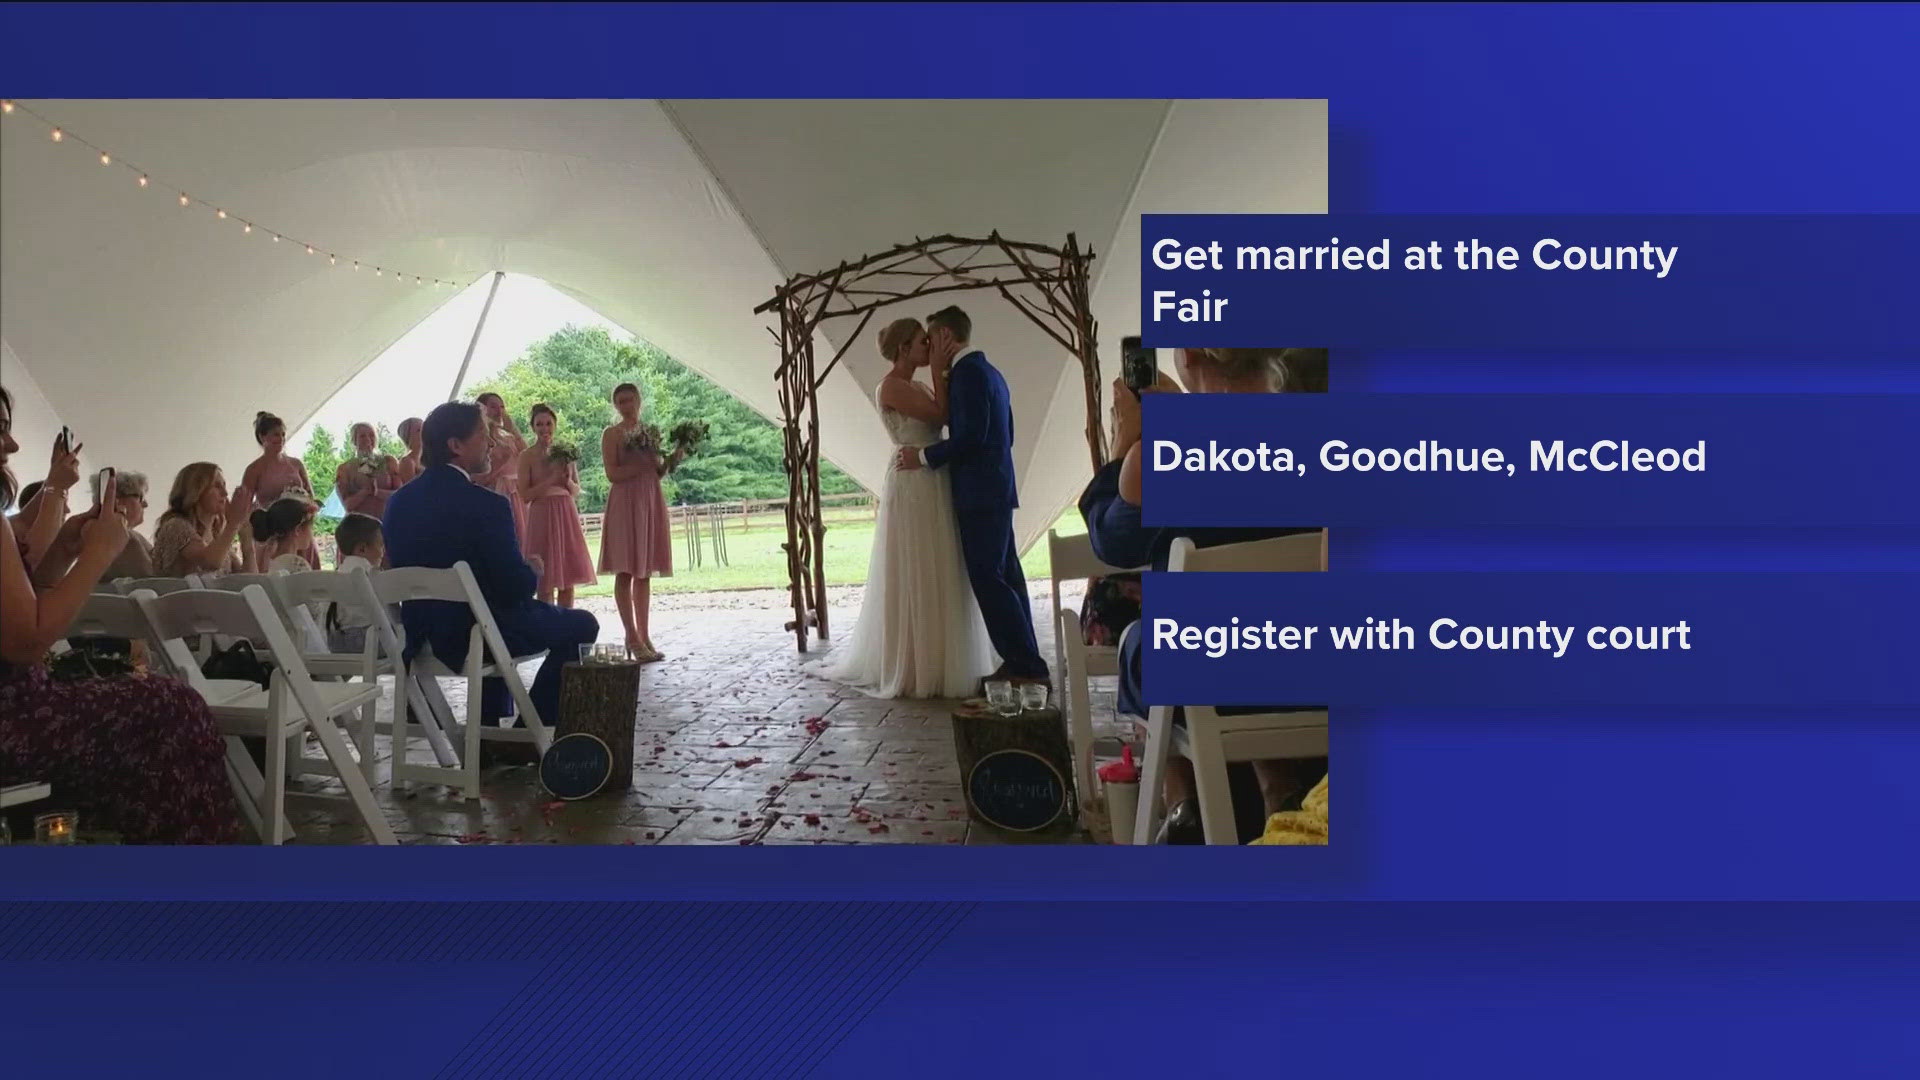 Put your wallet away and call off the caterers because the Minnesota Judicial Branch wants to marry you for free at one of three county fairs this summer.